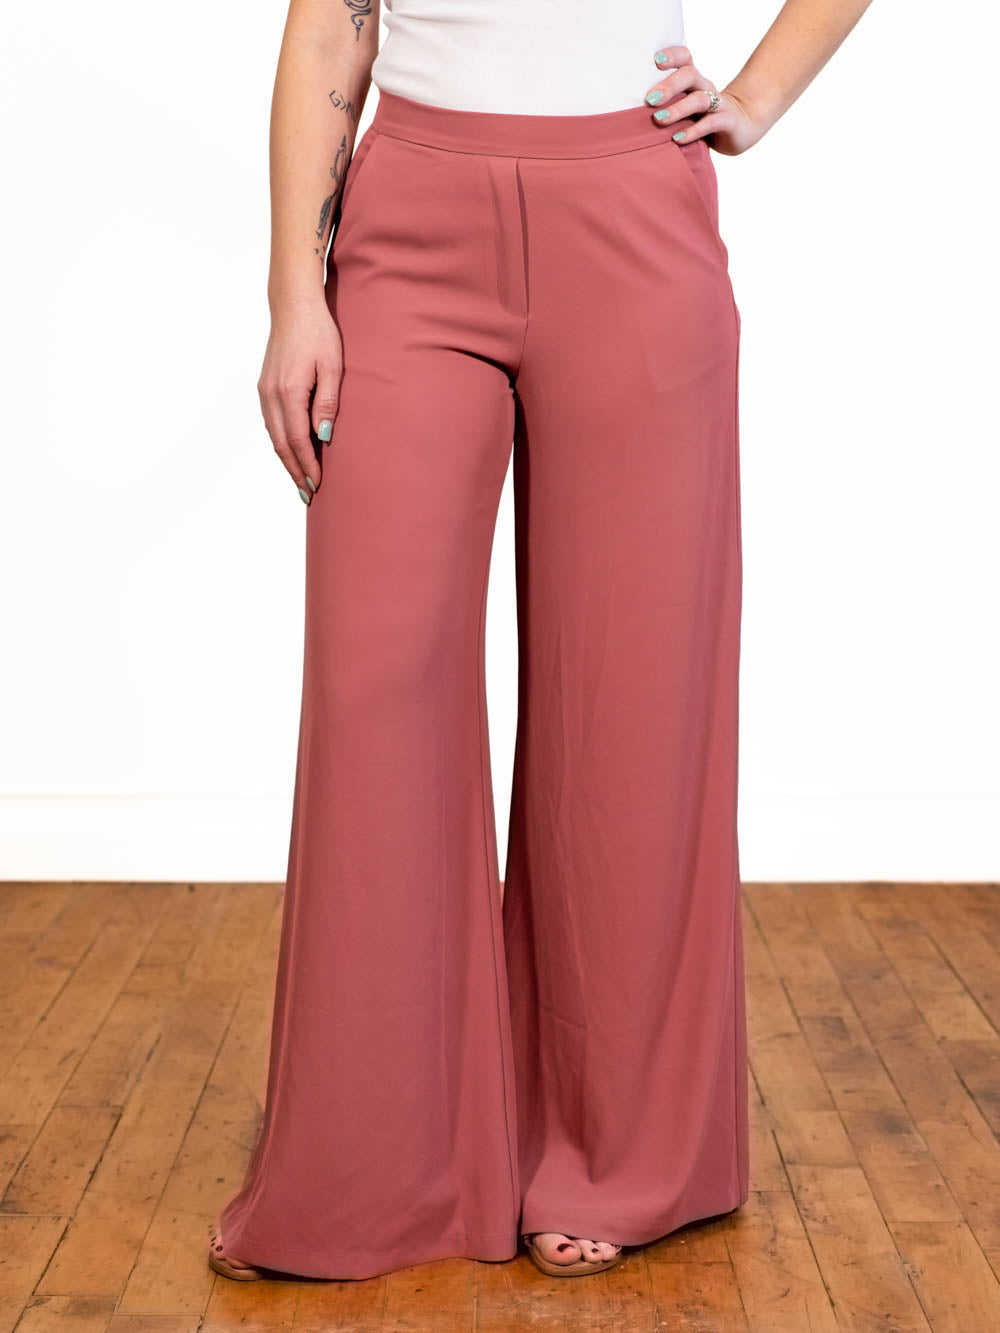 The Short Girl's Guide On How to Wear Wide-Leg Pants - Lucia